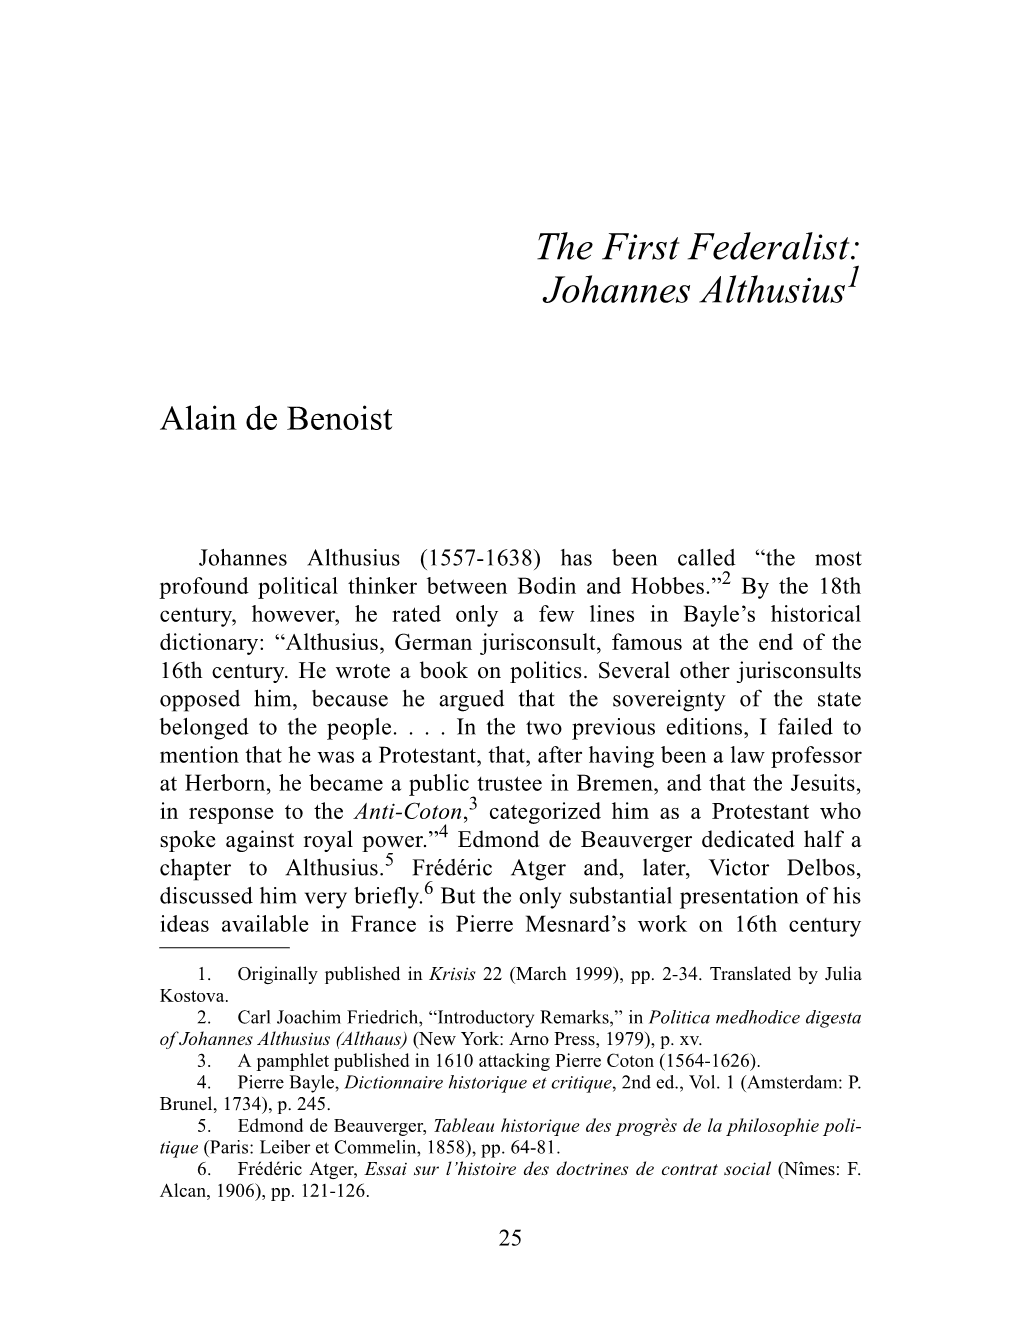 The First Federalist: Johannes Althusius1